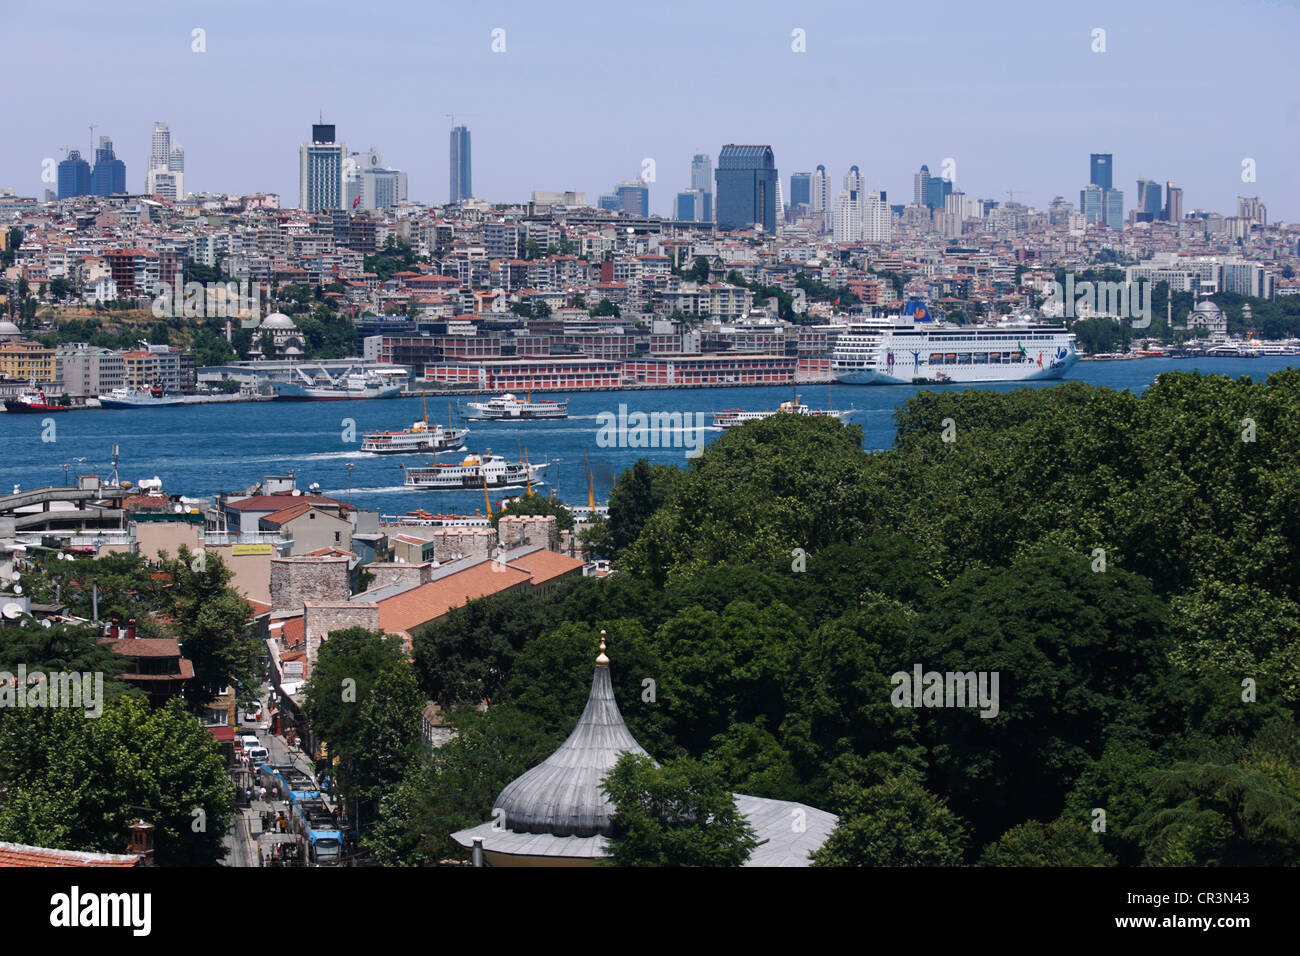 Turkey, Istanbul, Bosphorus seen from the peninsula with the business District on a hill at the city periphery Stock Photo